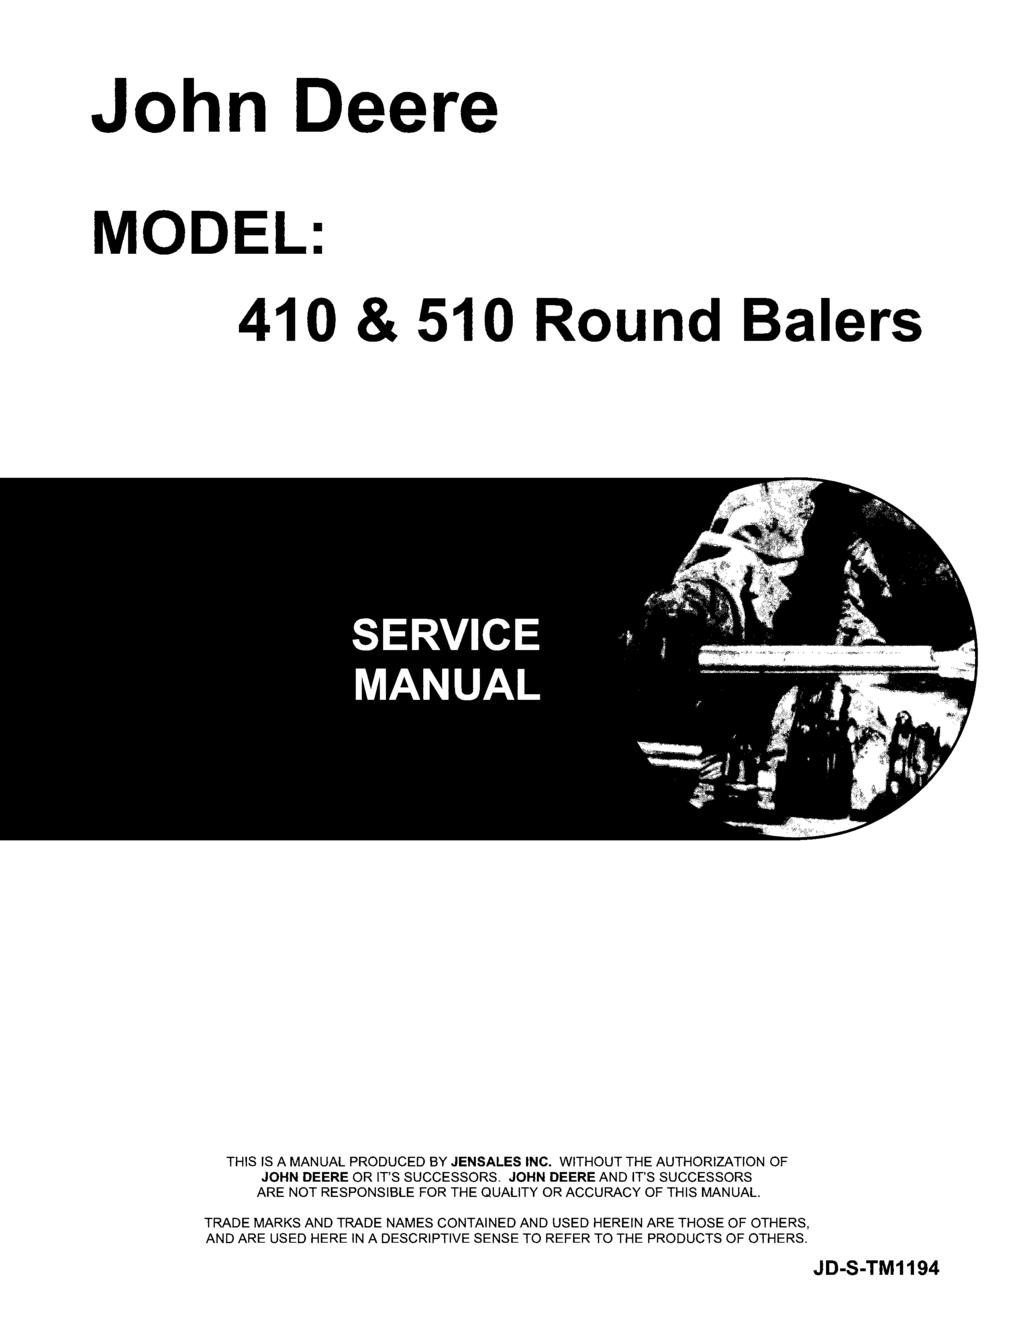 John Deere MODEL: 410 & 510 Round Balers THIS IS A MANUAL PRODUCED BY JENSALES INC. WITHOUT THE AUTHORIZATION OF JOHN DEERE OR IT'S SUCCESSORS.